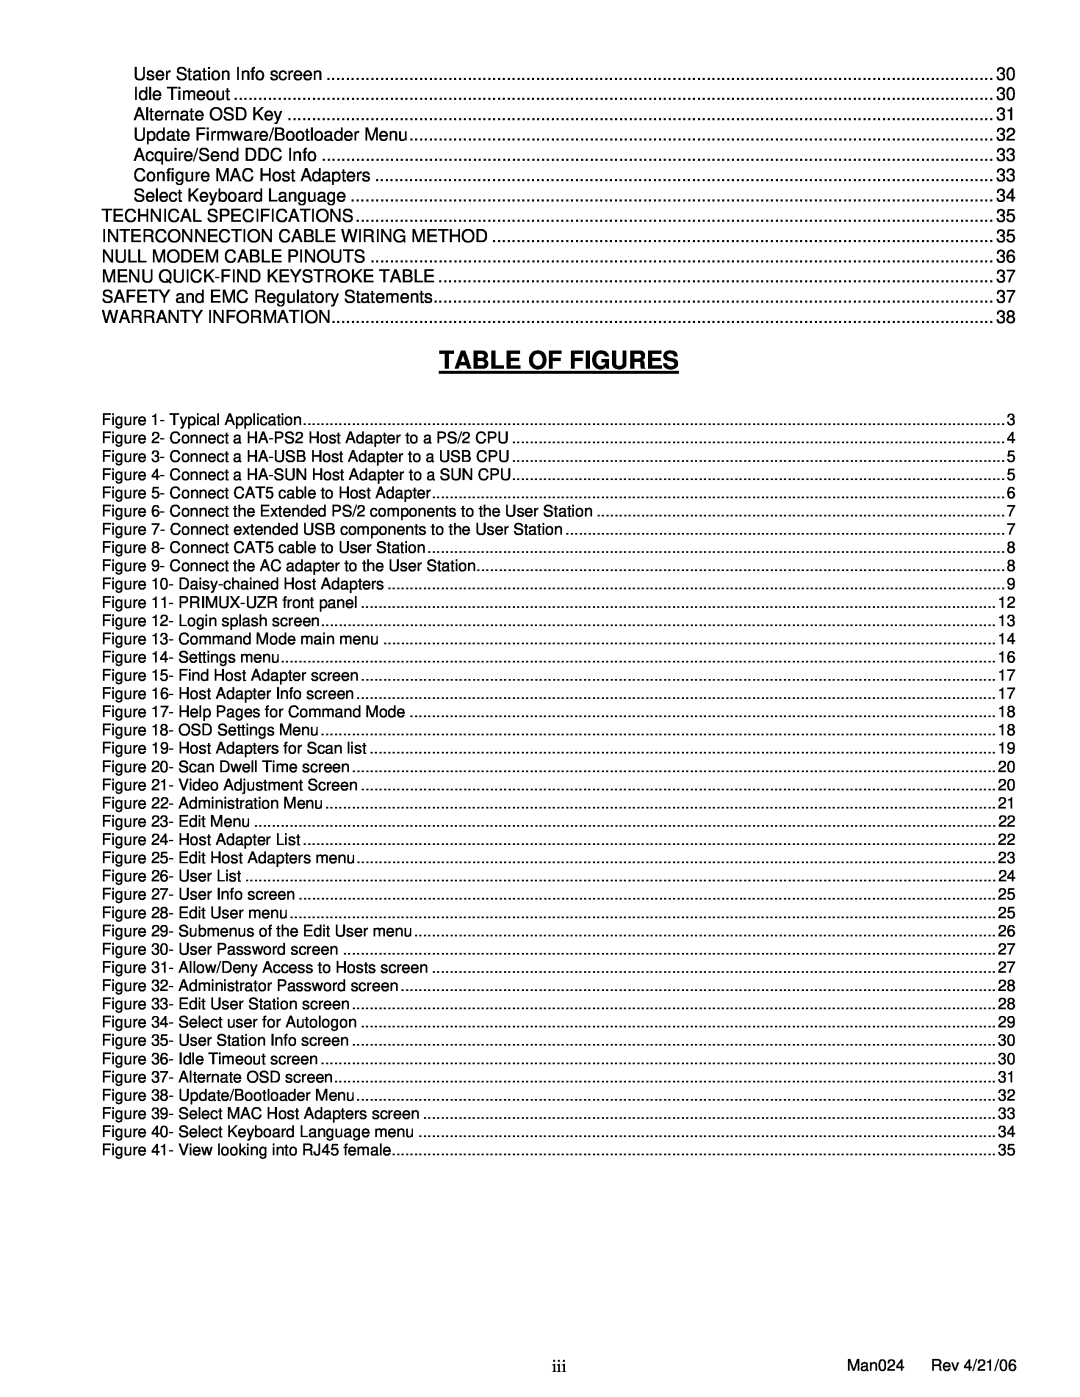 Network Technologies CAT5 operation manual Table Of Figures 